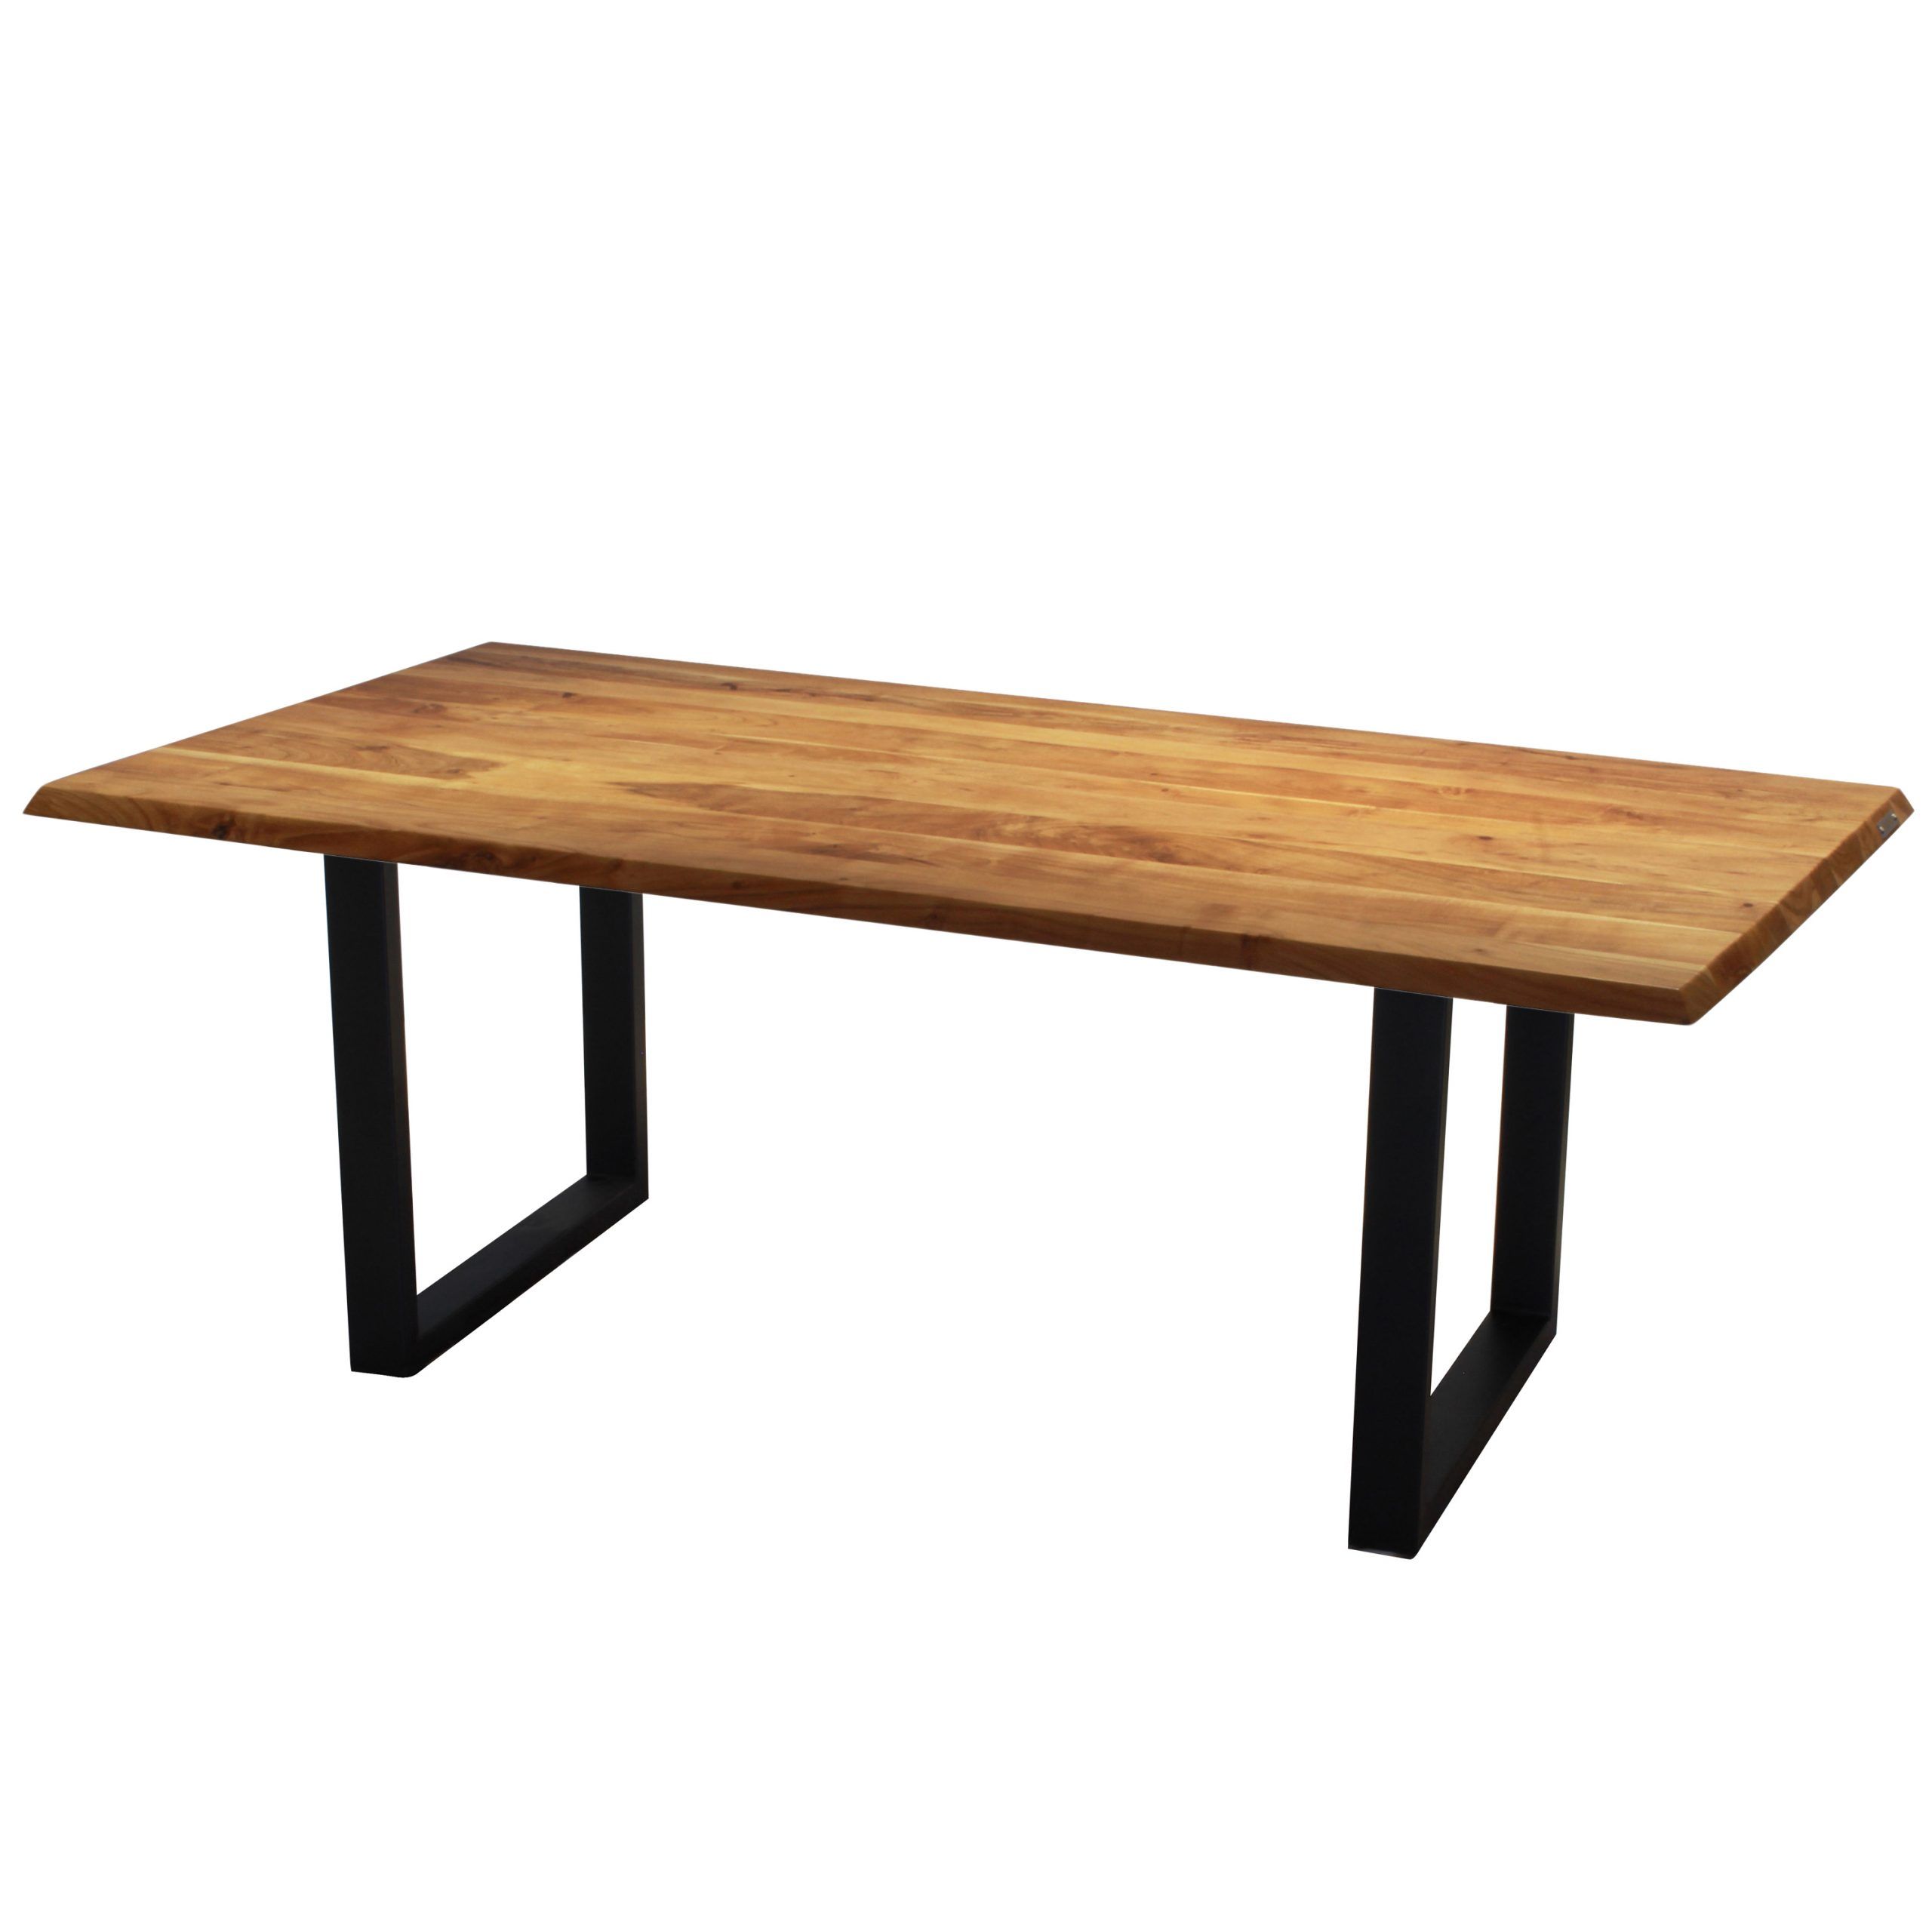 2018 Corcoran Acacia Live Edge Dining Table With Black Victor Legs – 96" Throughout Acacia Dining Tables With Black Victor Legs (View 2 of 30)